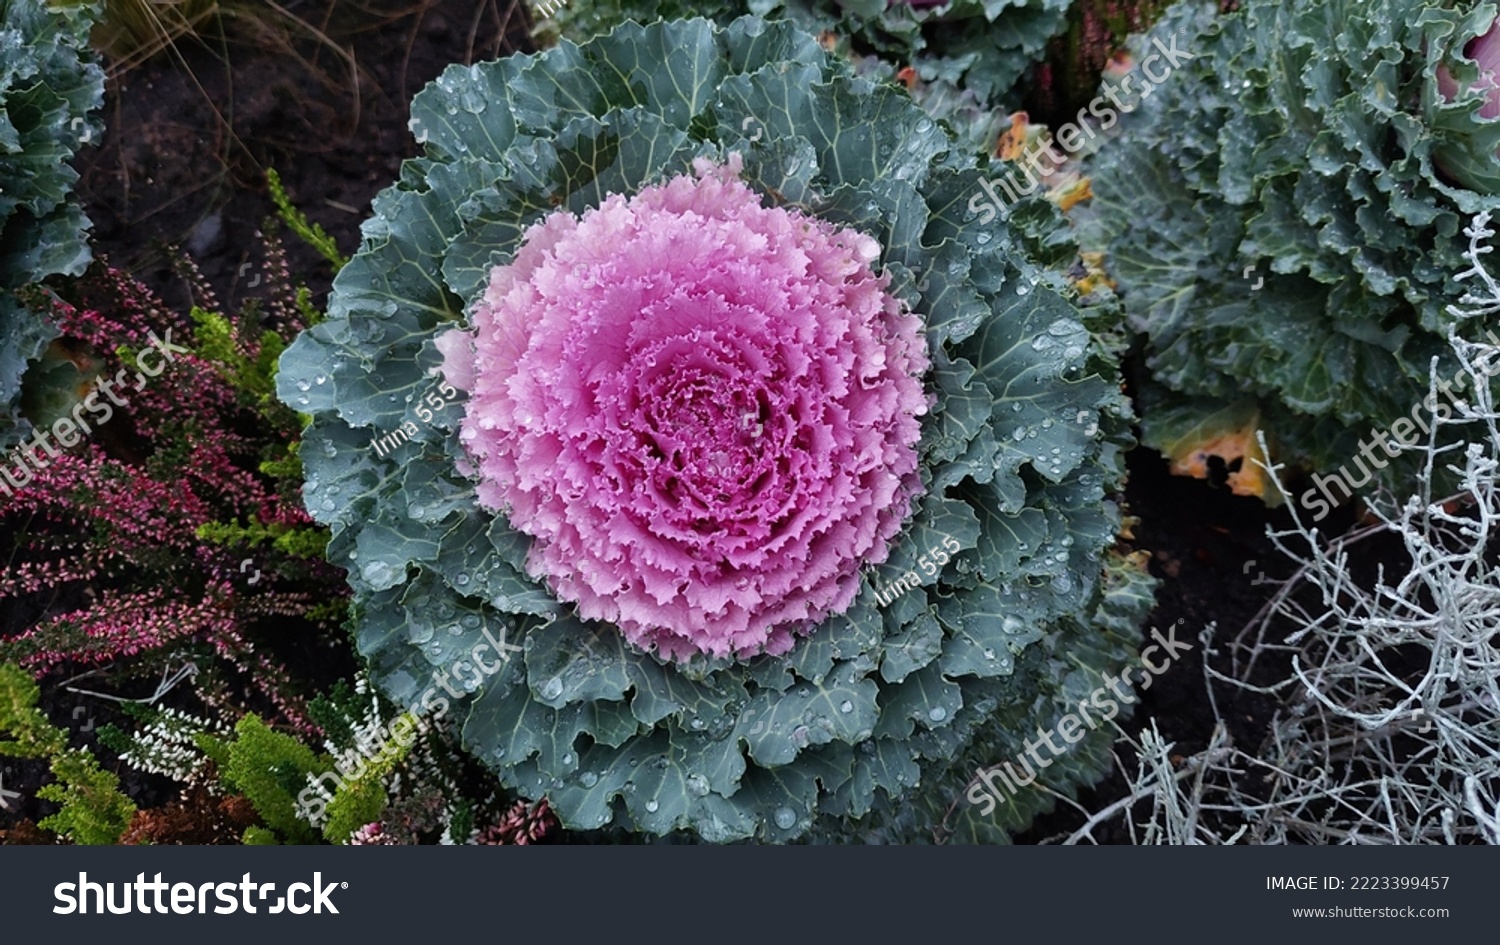 Daugavpils,Latvia 10-06-2022.Decorative cabbage in the autumn flowerbed. Green and lilac leaves with raindrops. #2223399457